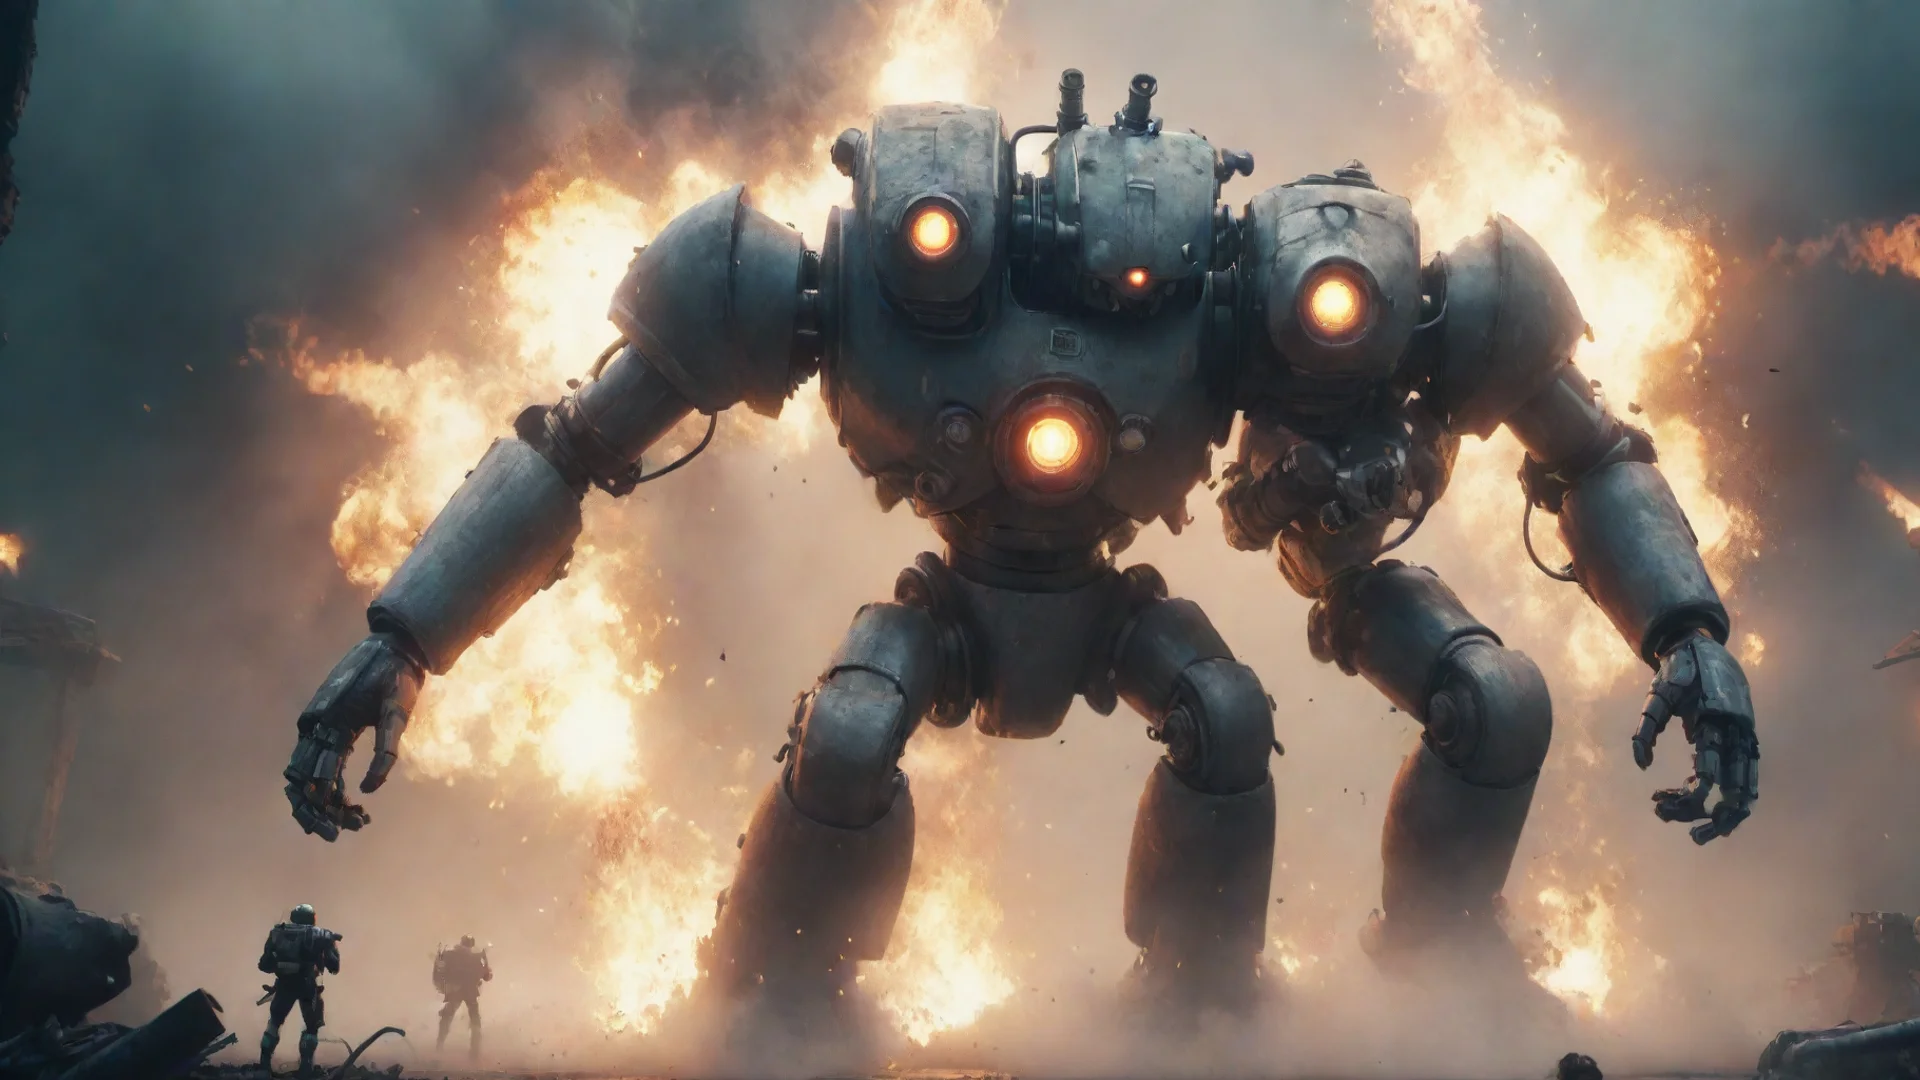 artstation art a giant robot diver with pipes round head fight against a huge monster battle explosion blur lens cinematic style grainy octane render concept art hyper confident engaging wow 3 wide.